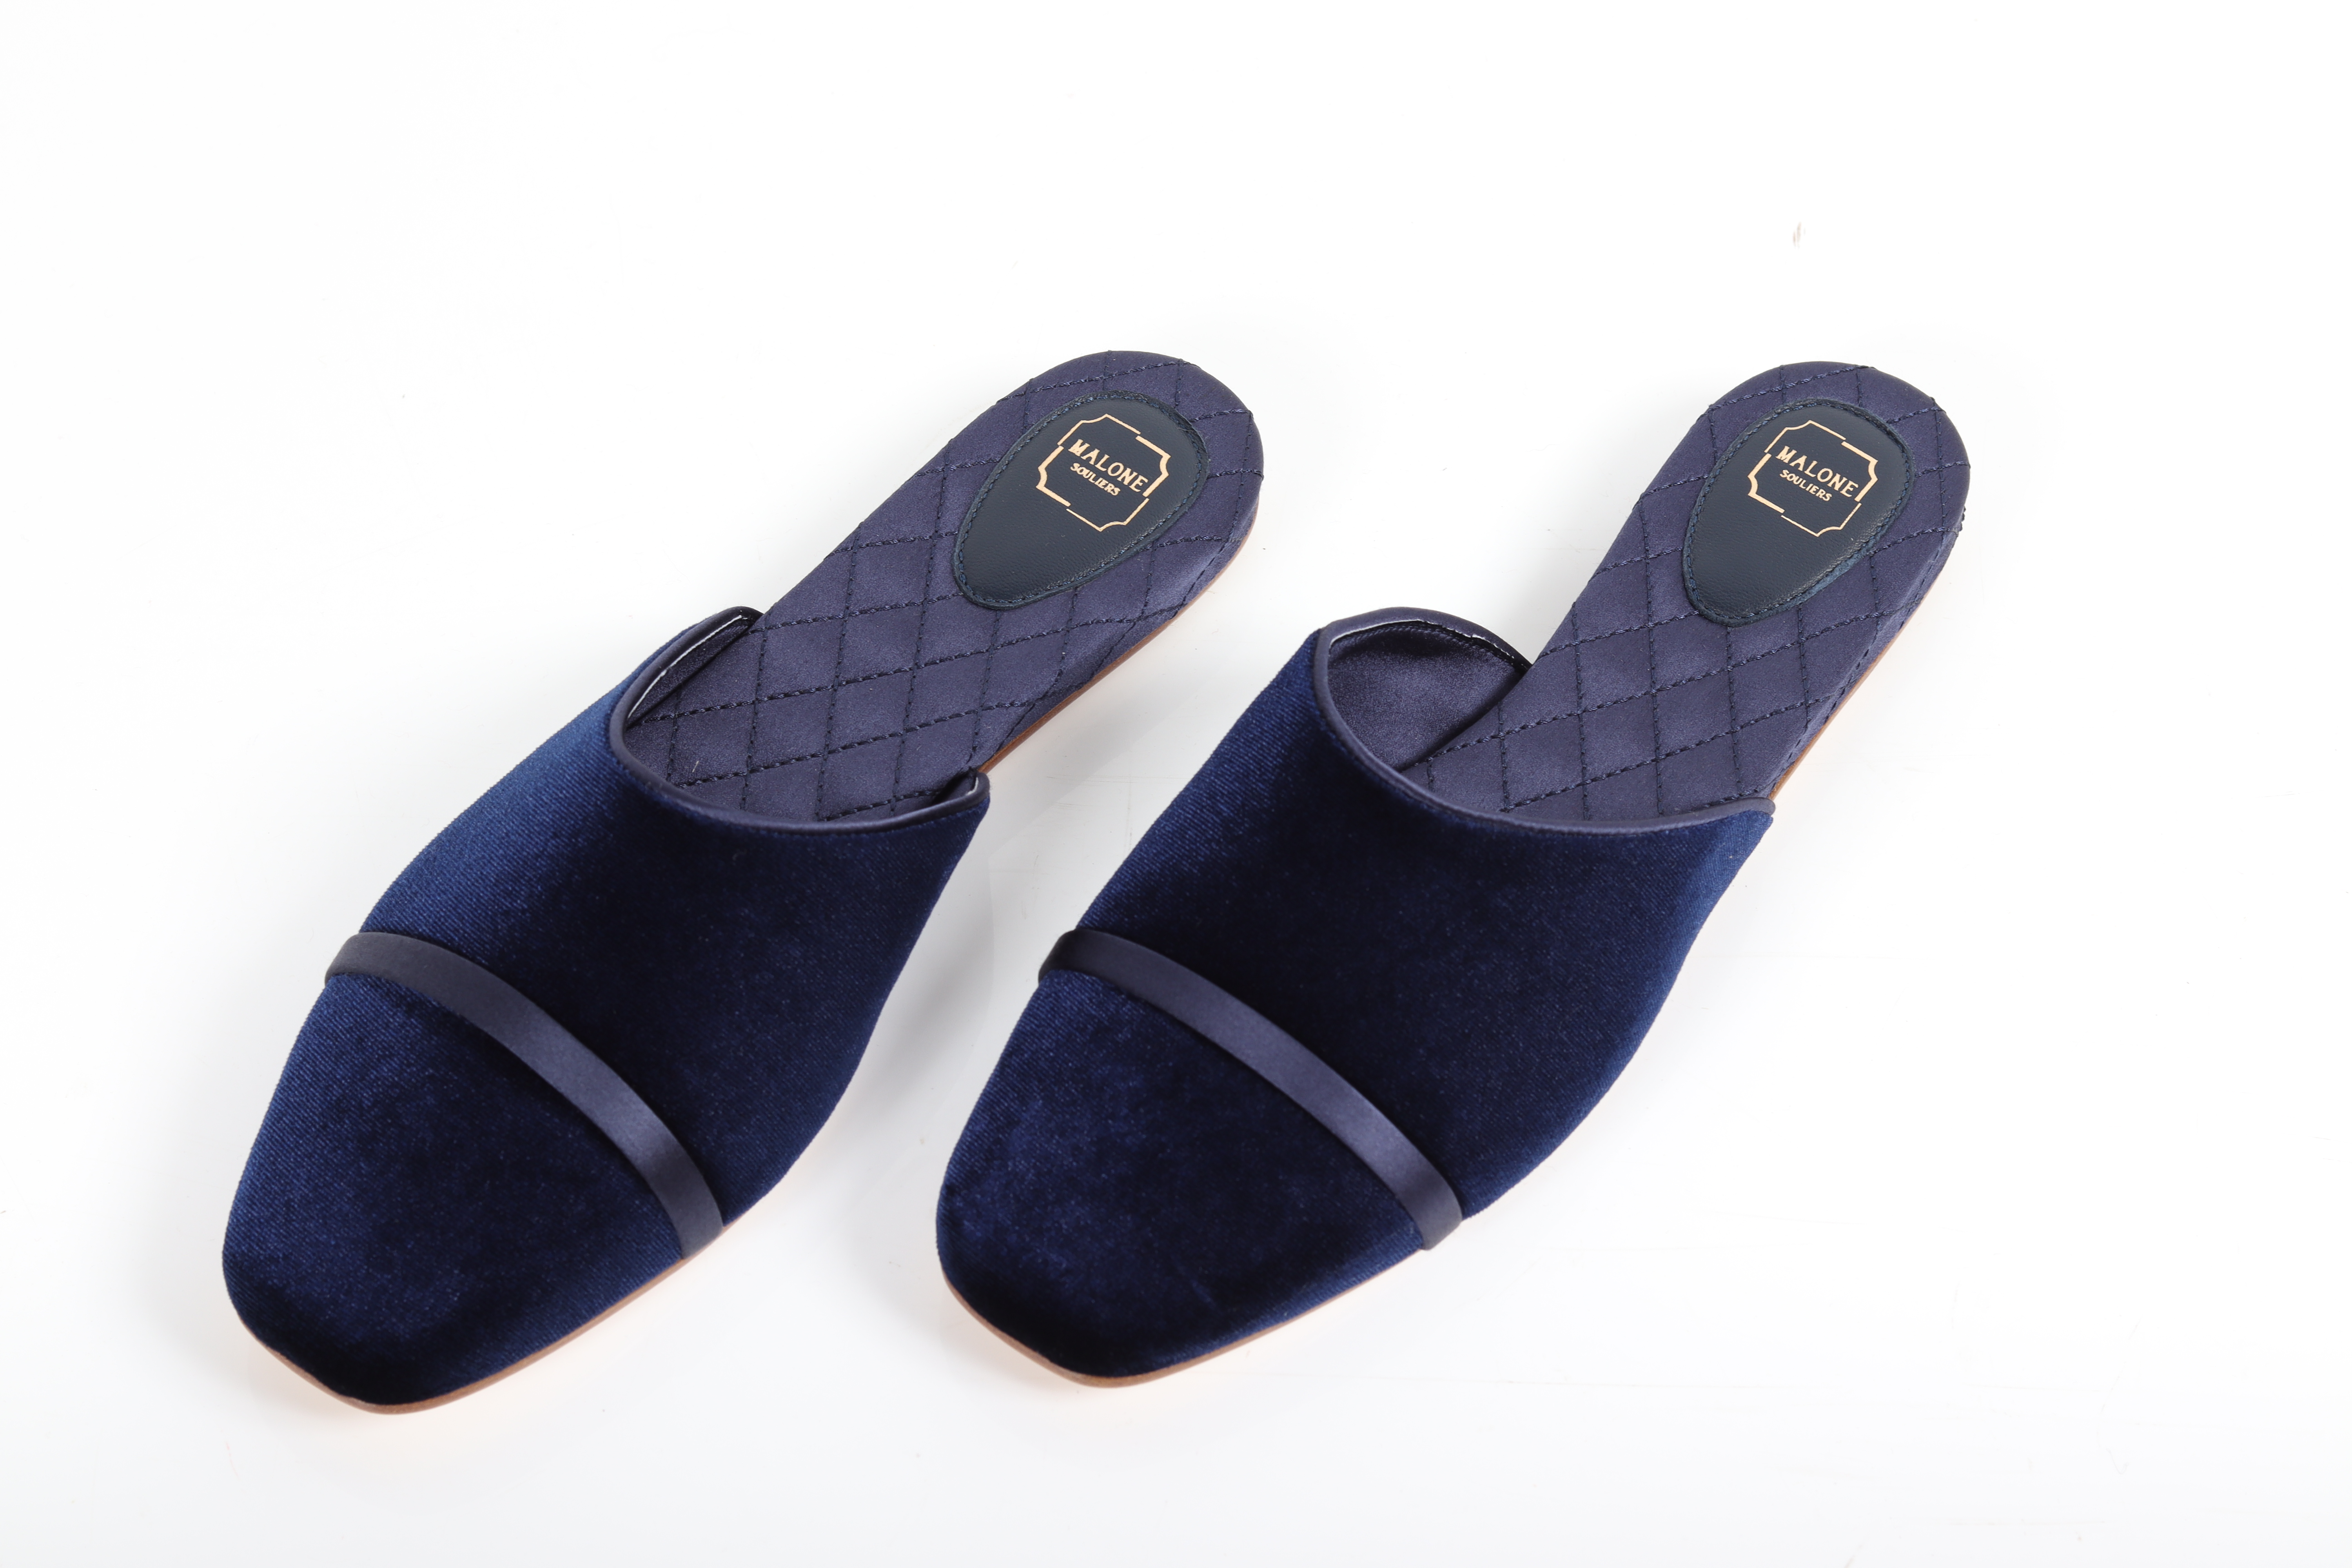 MALONE SOULIERS - A PAIR OF BLUE VELVET SLIDES - Image 2 of 3